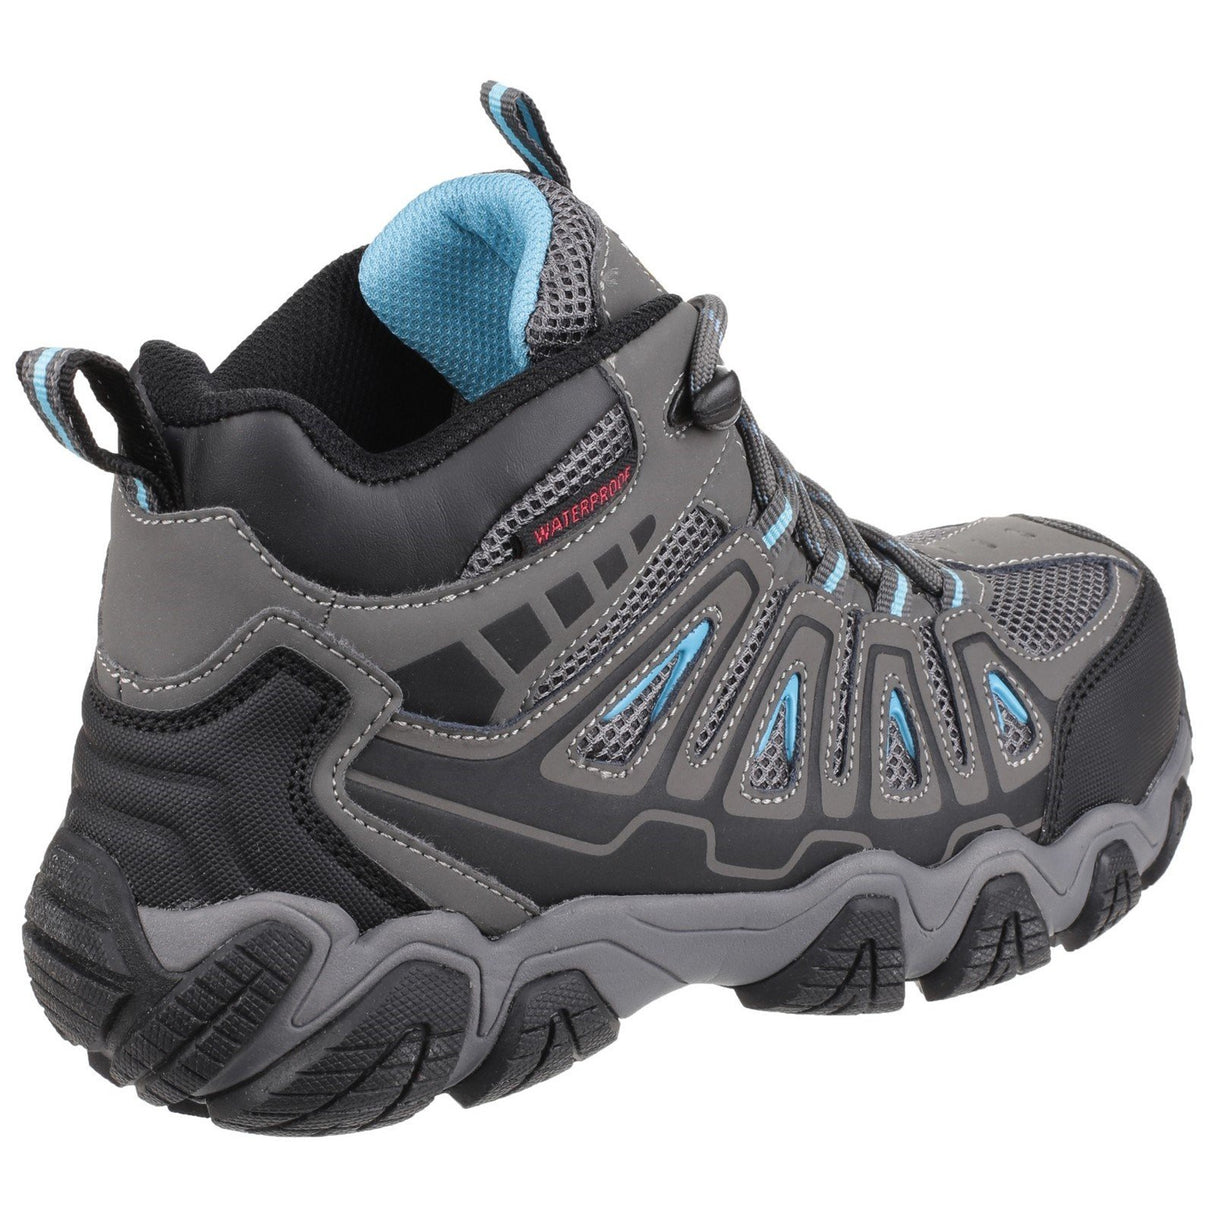 Amblers Safety Ladies Safety Hiking Boots